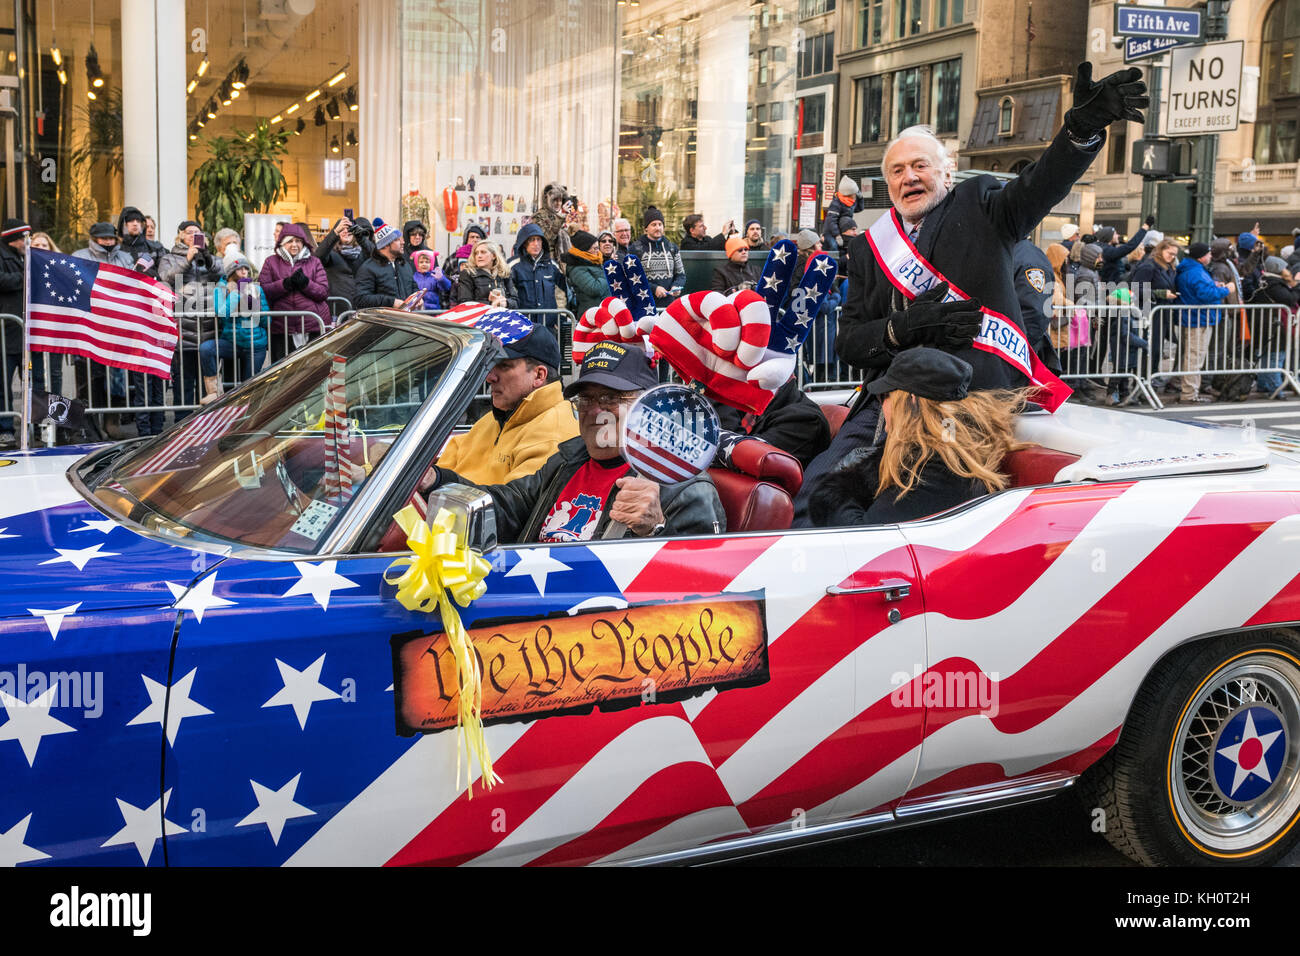 New York, USA, 11 Nov 2017. Former astronaut and US Air Force Korean War Veteran Buzz Aldrin waves to cheering crowds from a vintage cadillac at the start of the 2017 Veterans Day parade . Dr. Aldrin, one of the first two humans to walk on the Moon in 1969, was the Grand Marshal of the parade this year, Photo by Enrique Shore/Alamy Live News Stock Photo